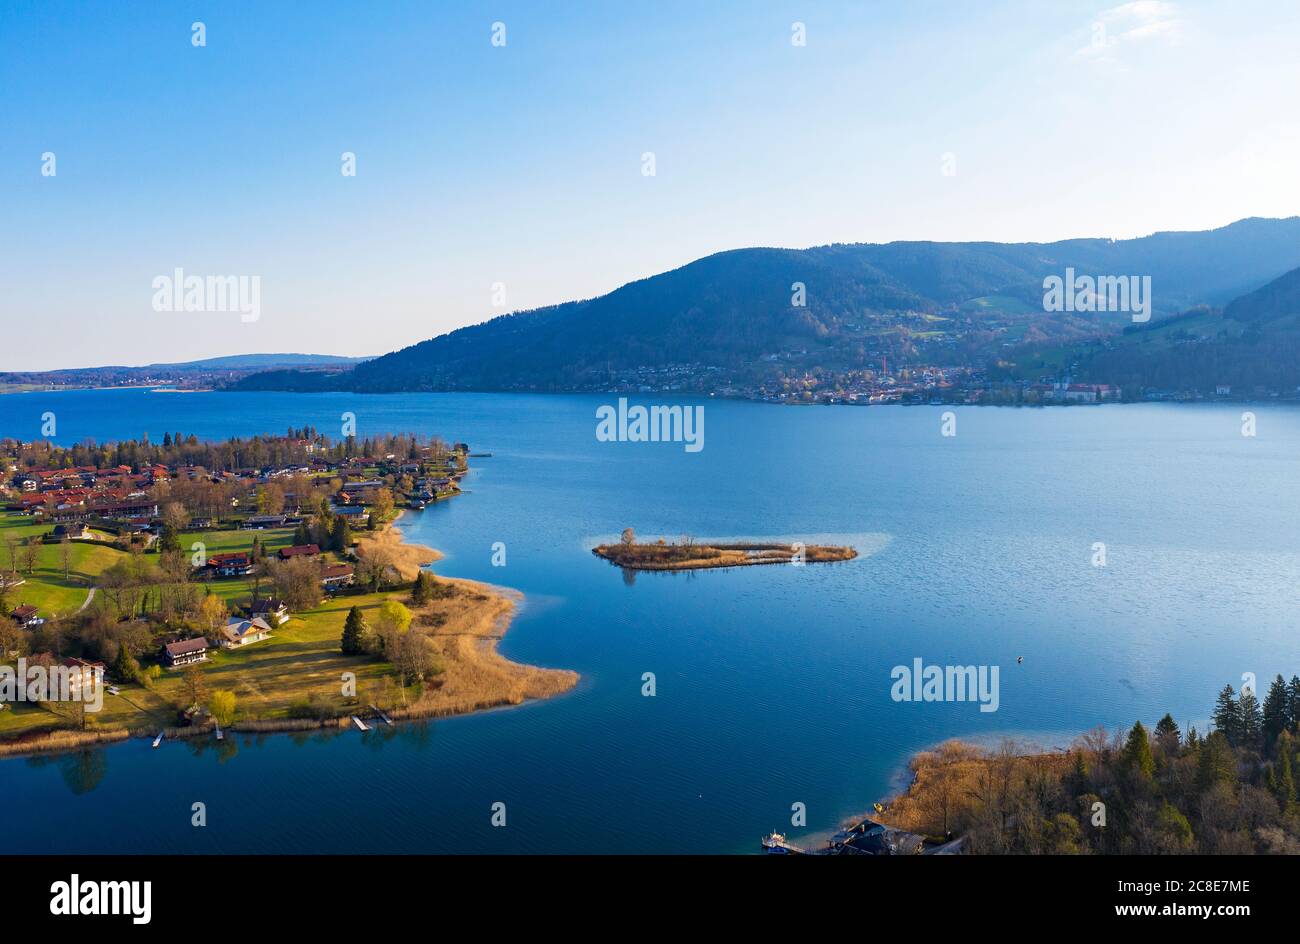 Germany, Bavaria, Drone view of Tegernsee lake Stock Photo